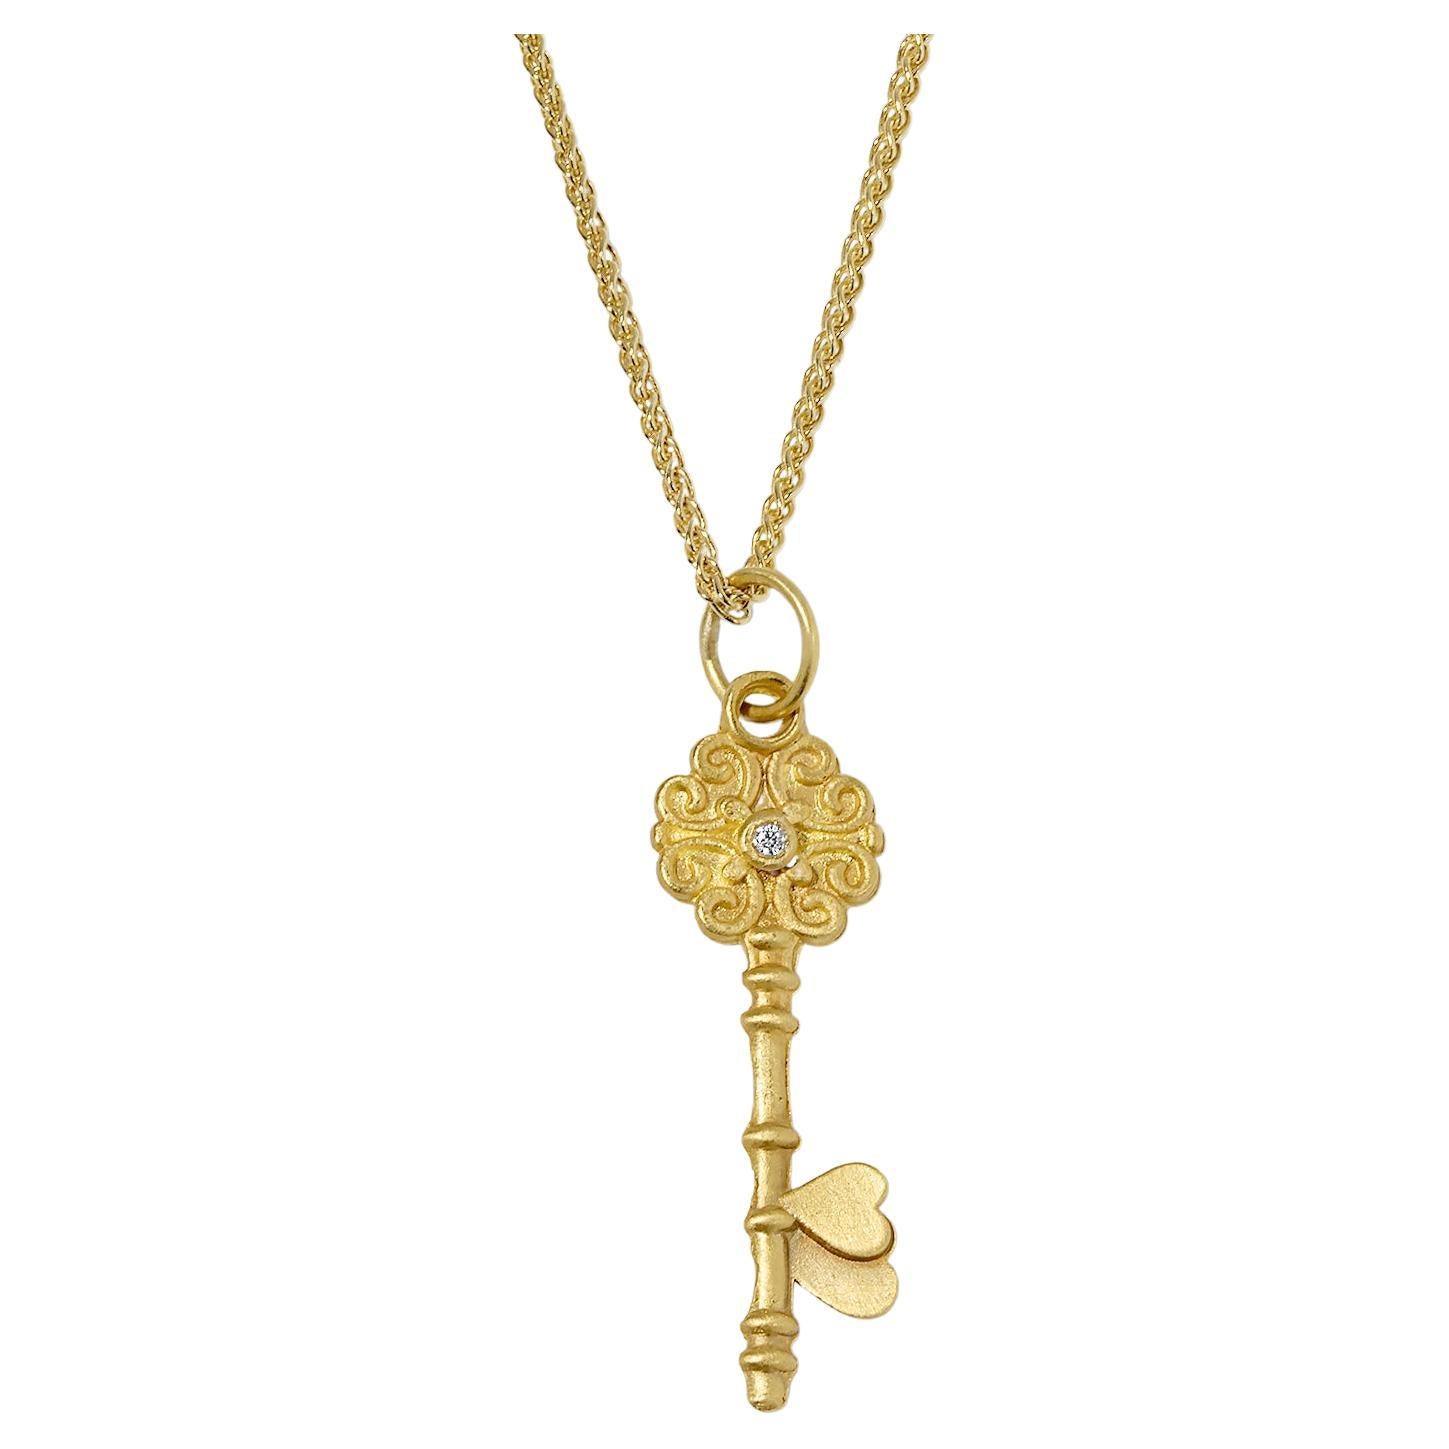 Small Love Key Charm Pendant Necklace with Diamond, 24kt Solid Gold For Sale